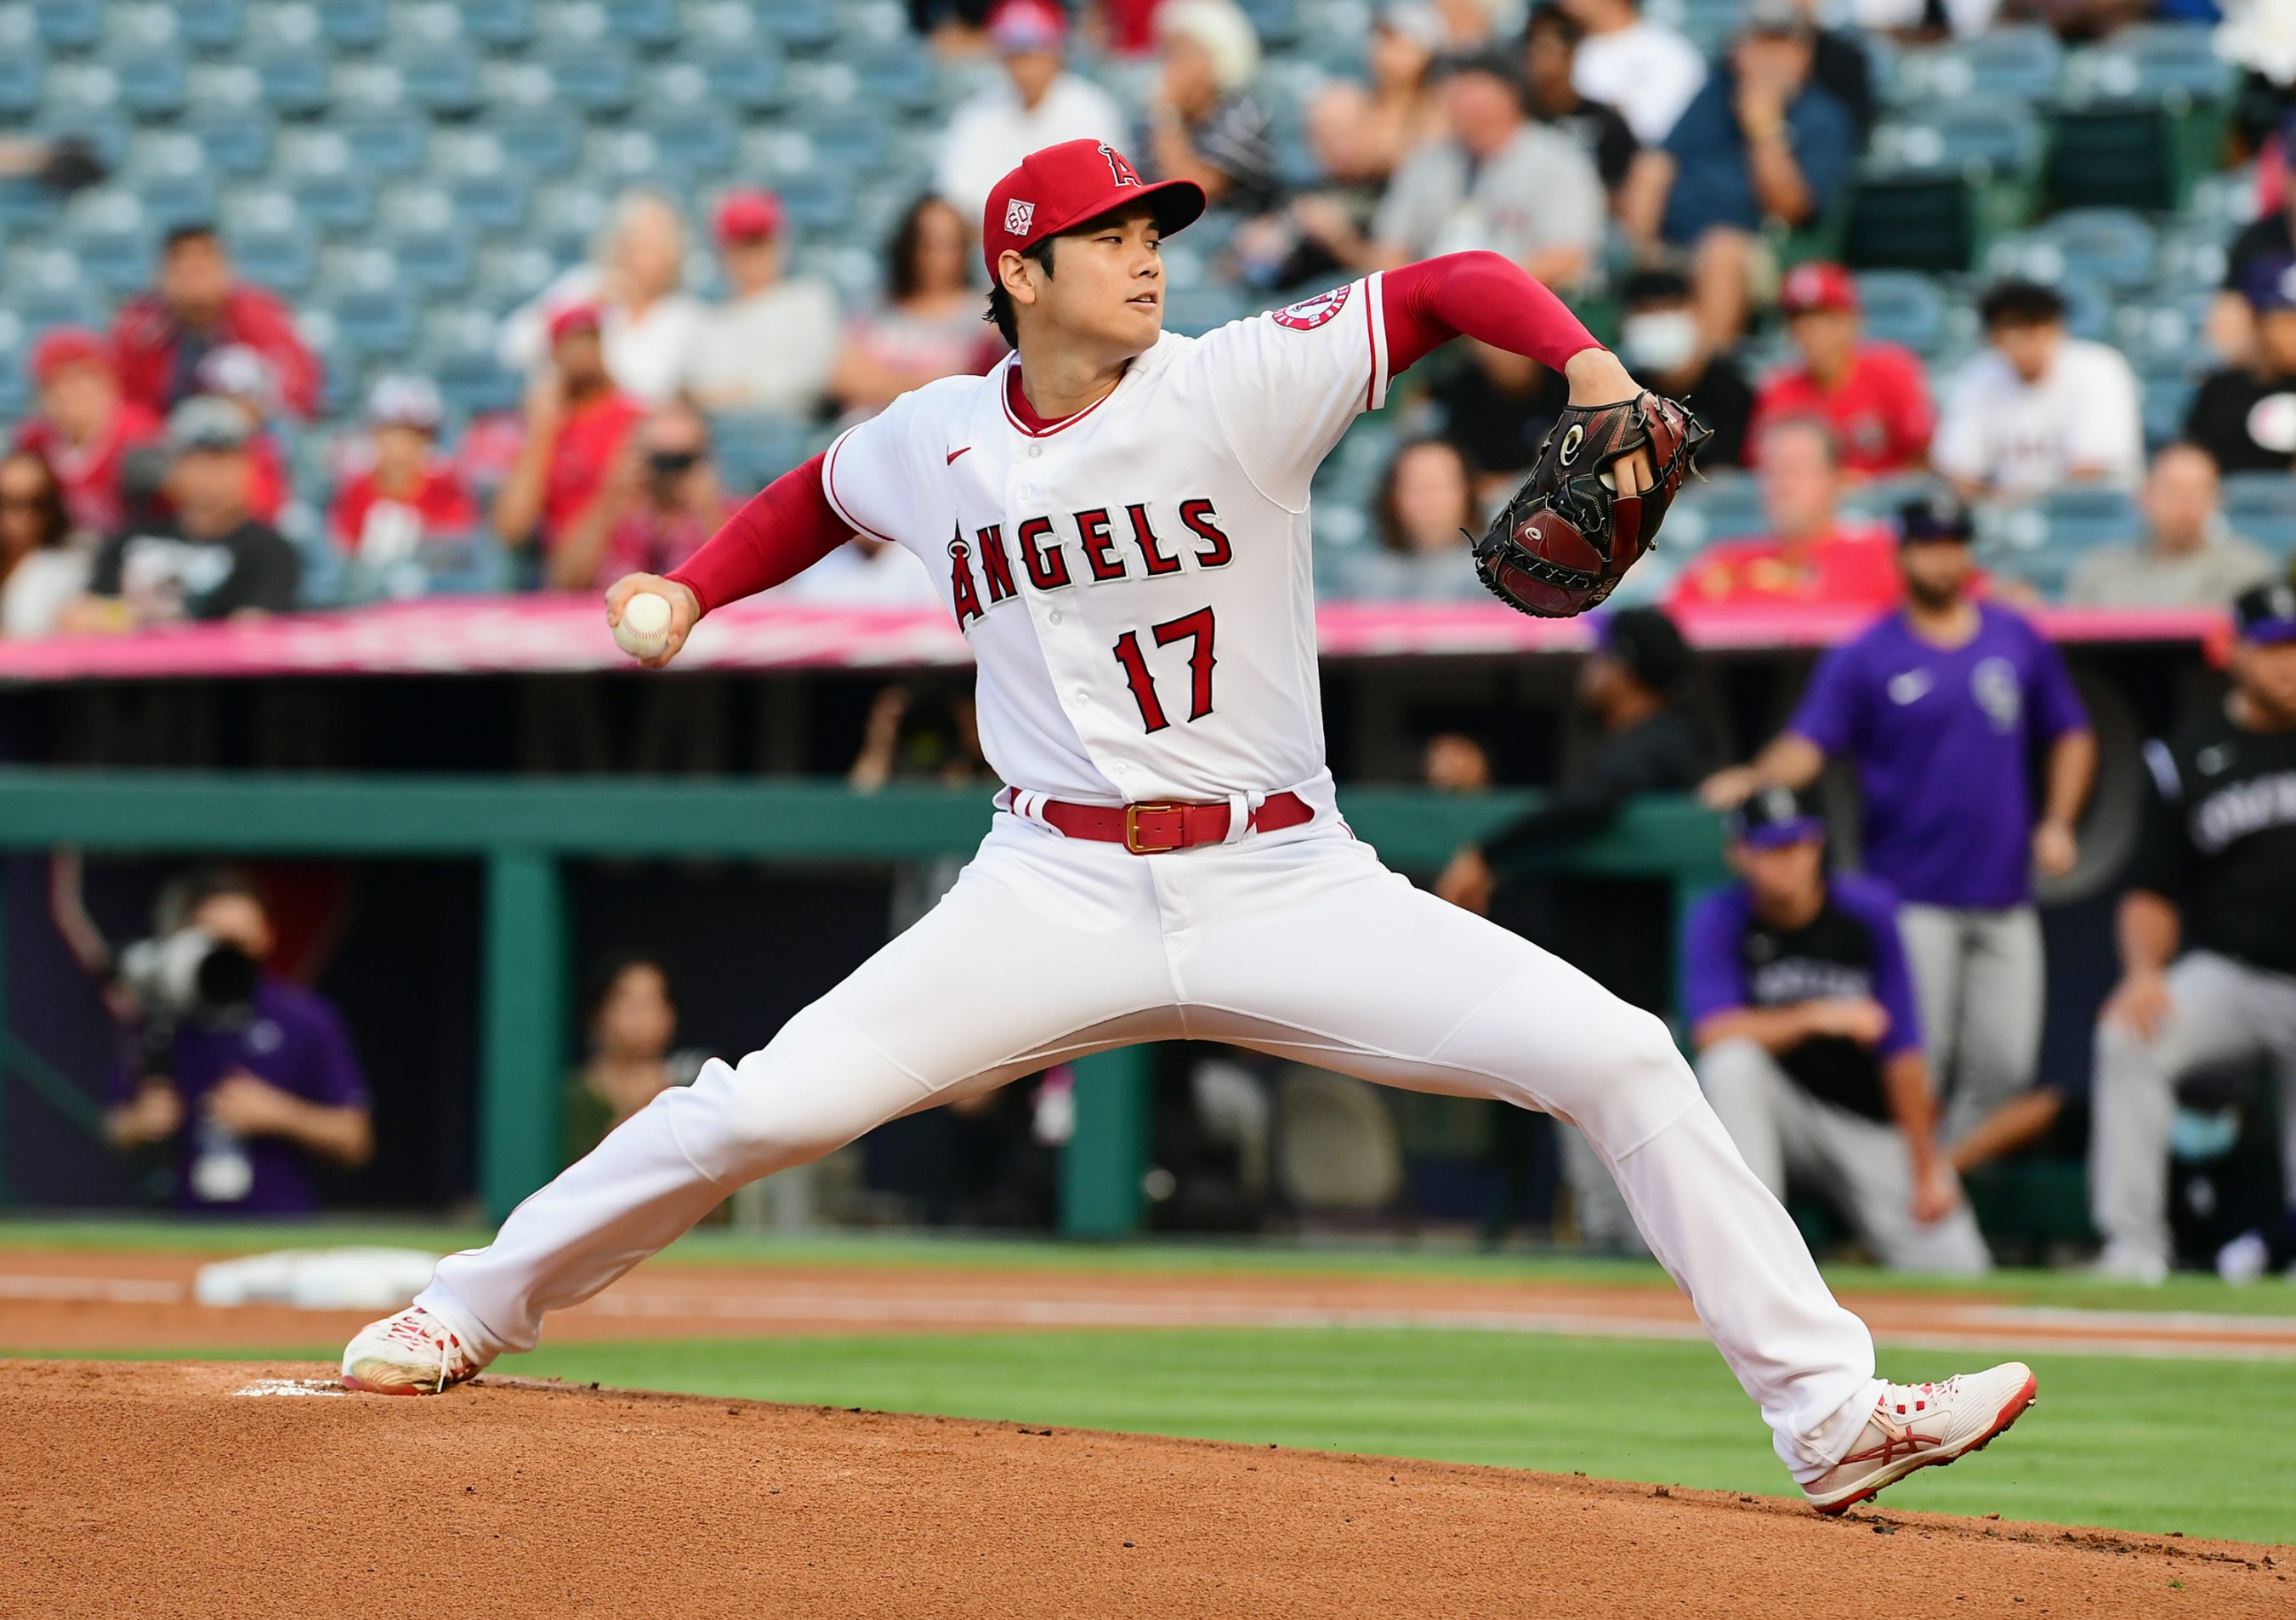 What's So Special About Shohei Ohtani?